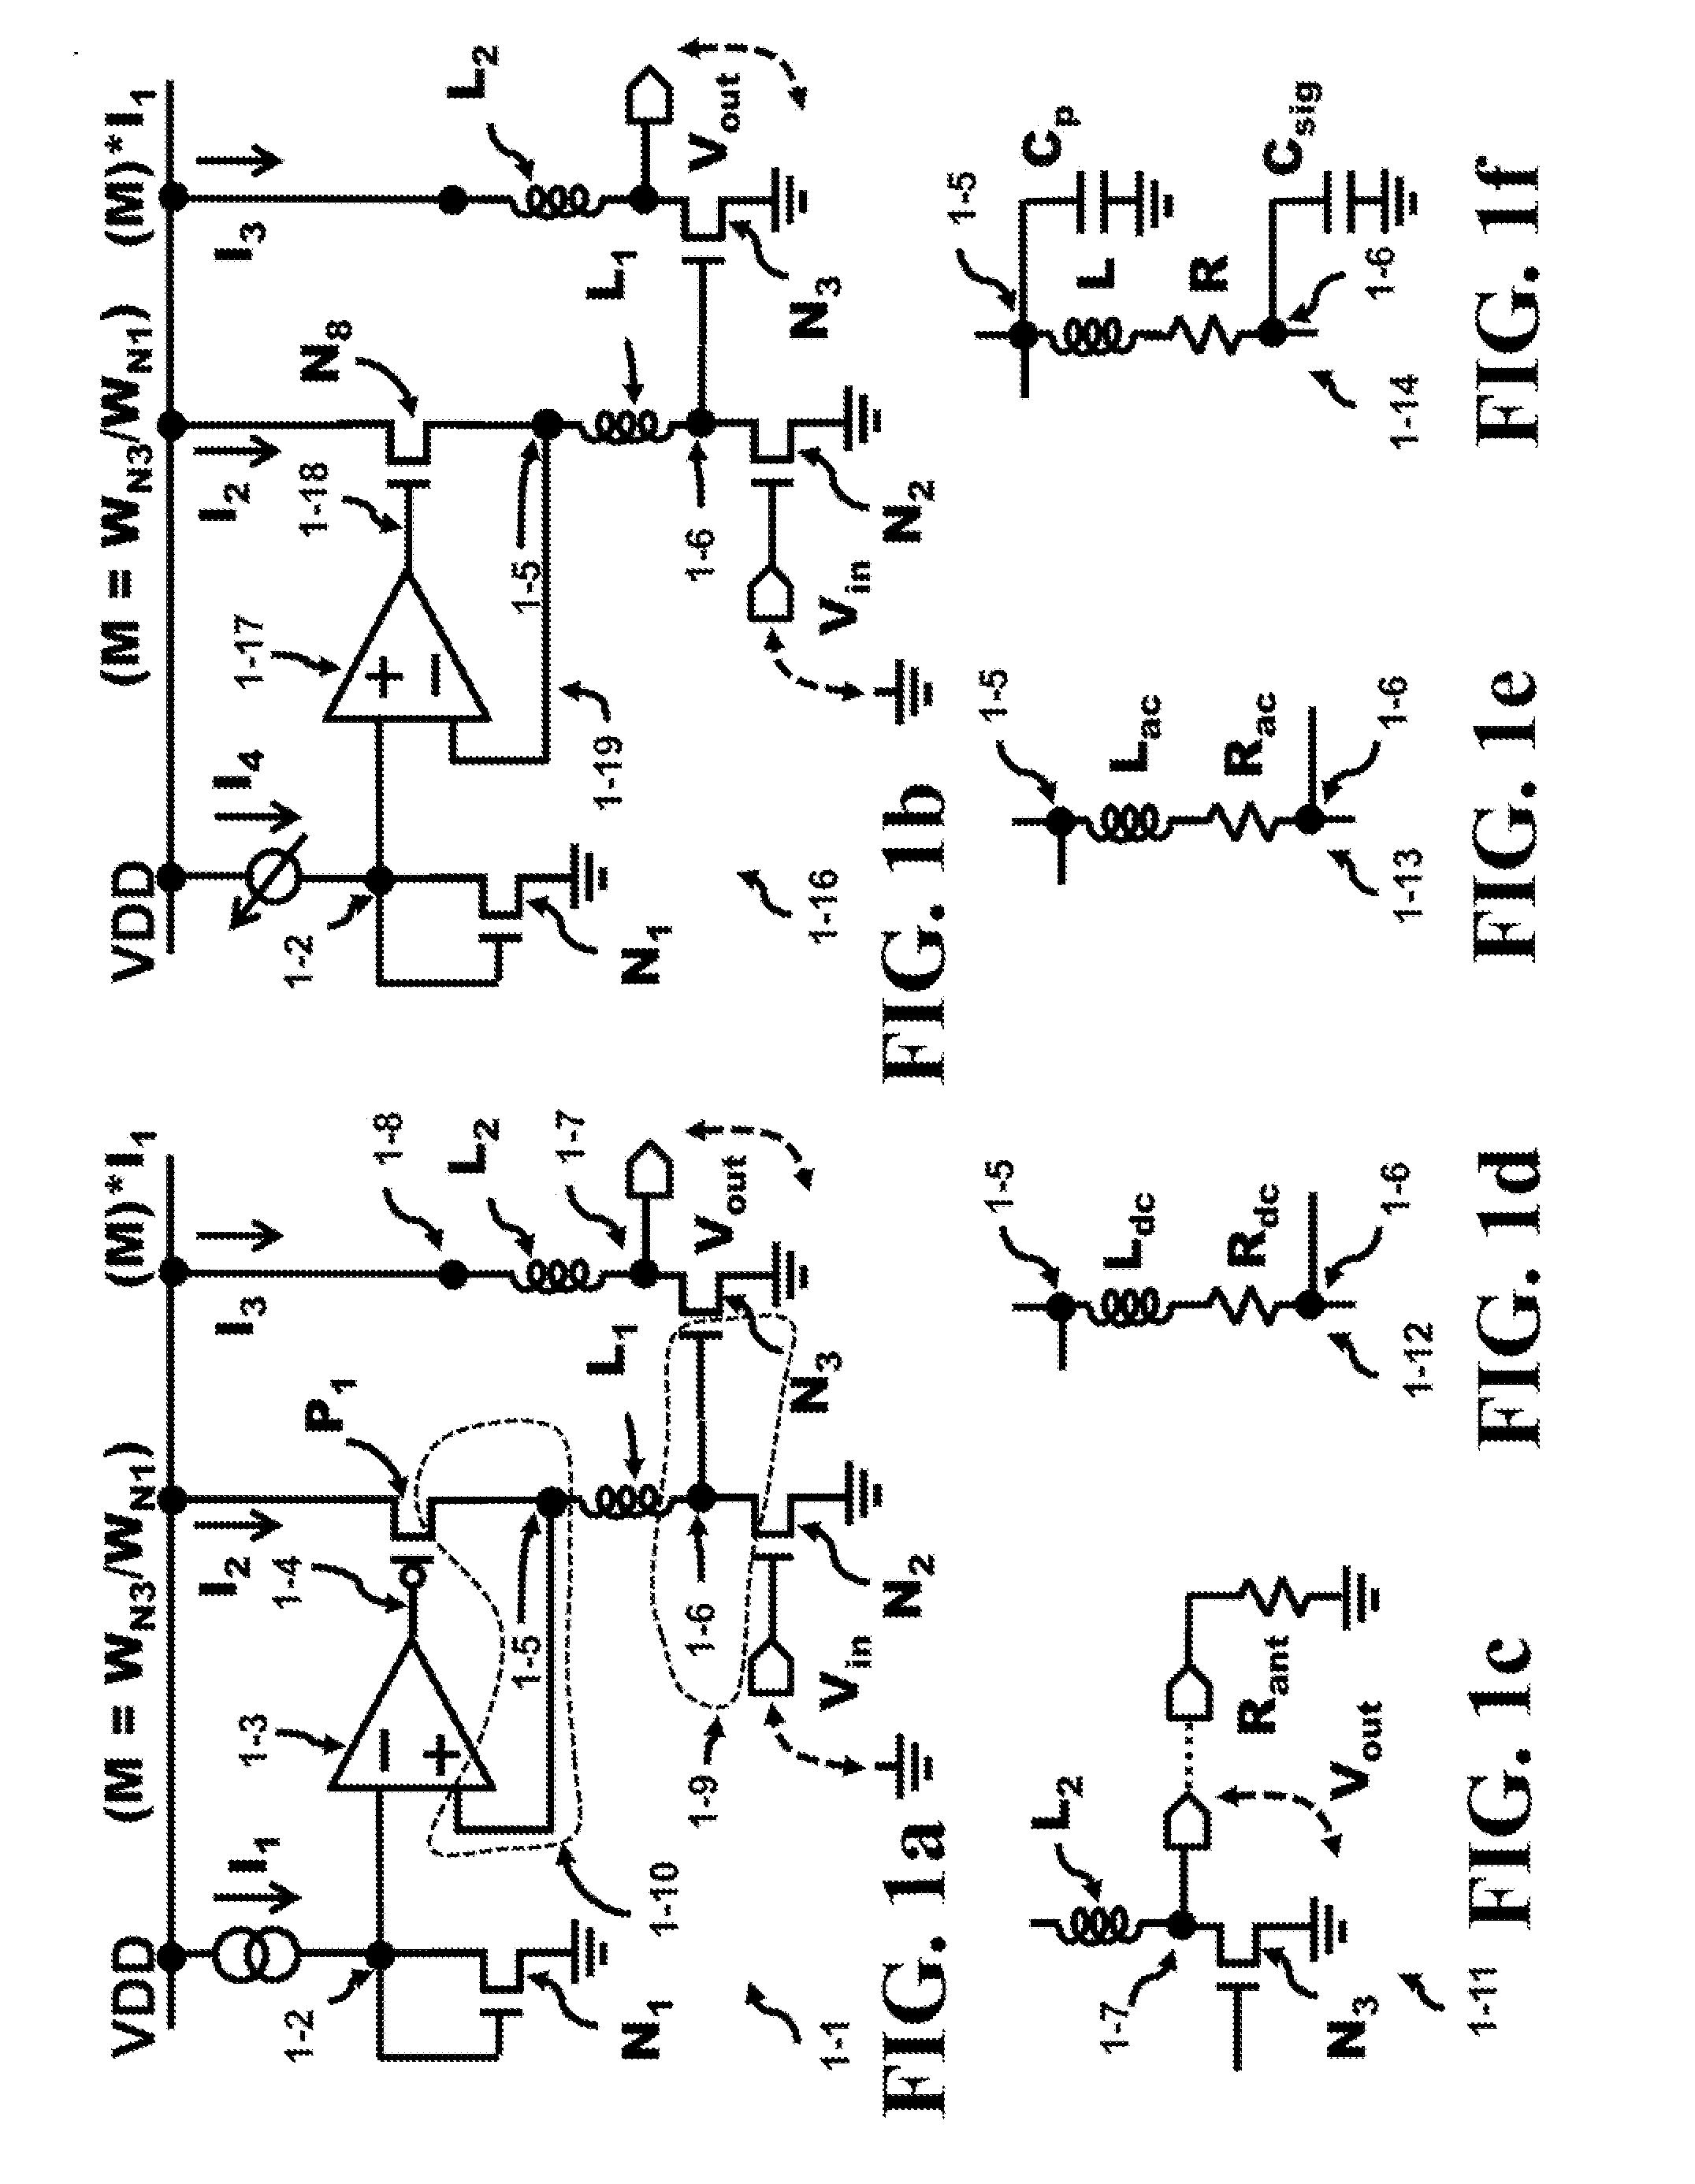 Direct Coupled Biasing Circuit for High Frequency Applications